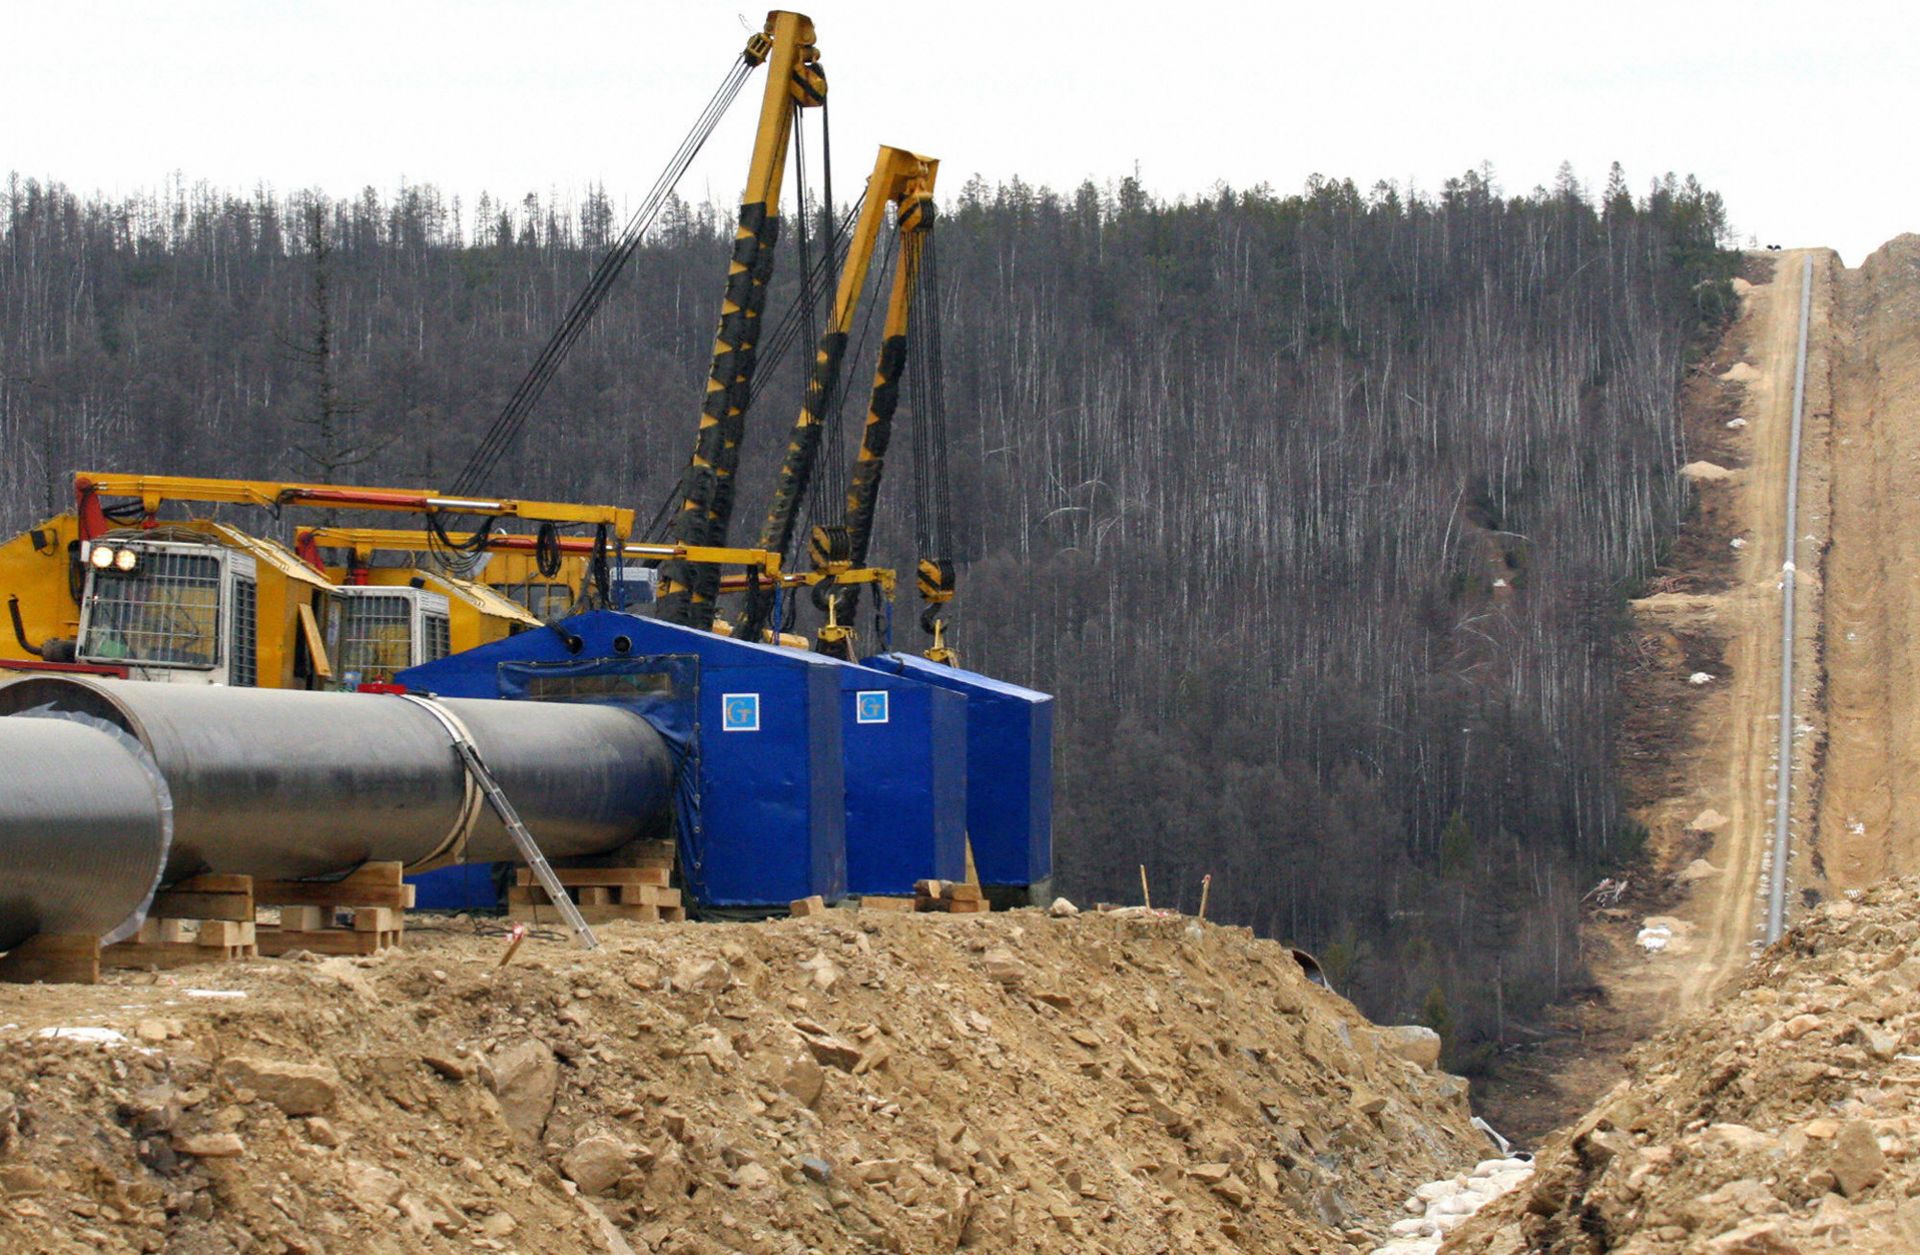 View of pipes and equipment near a trench of the Eastern Siberia-Pacific Ocean oil pipeline in Siberia, Russia.